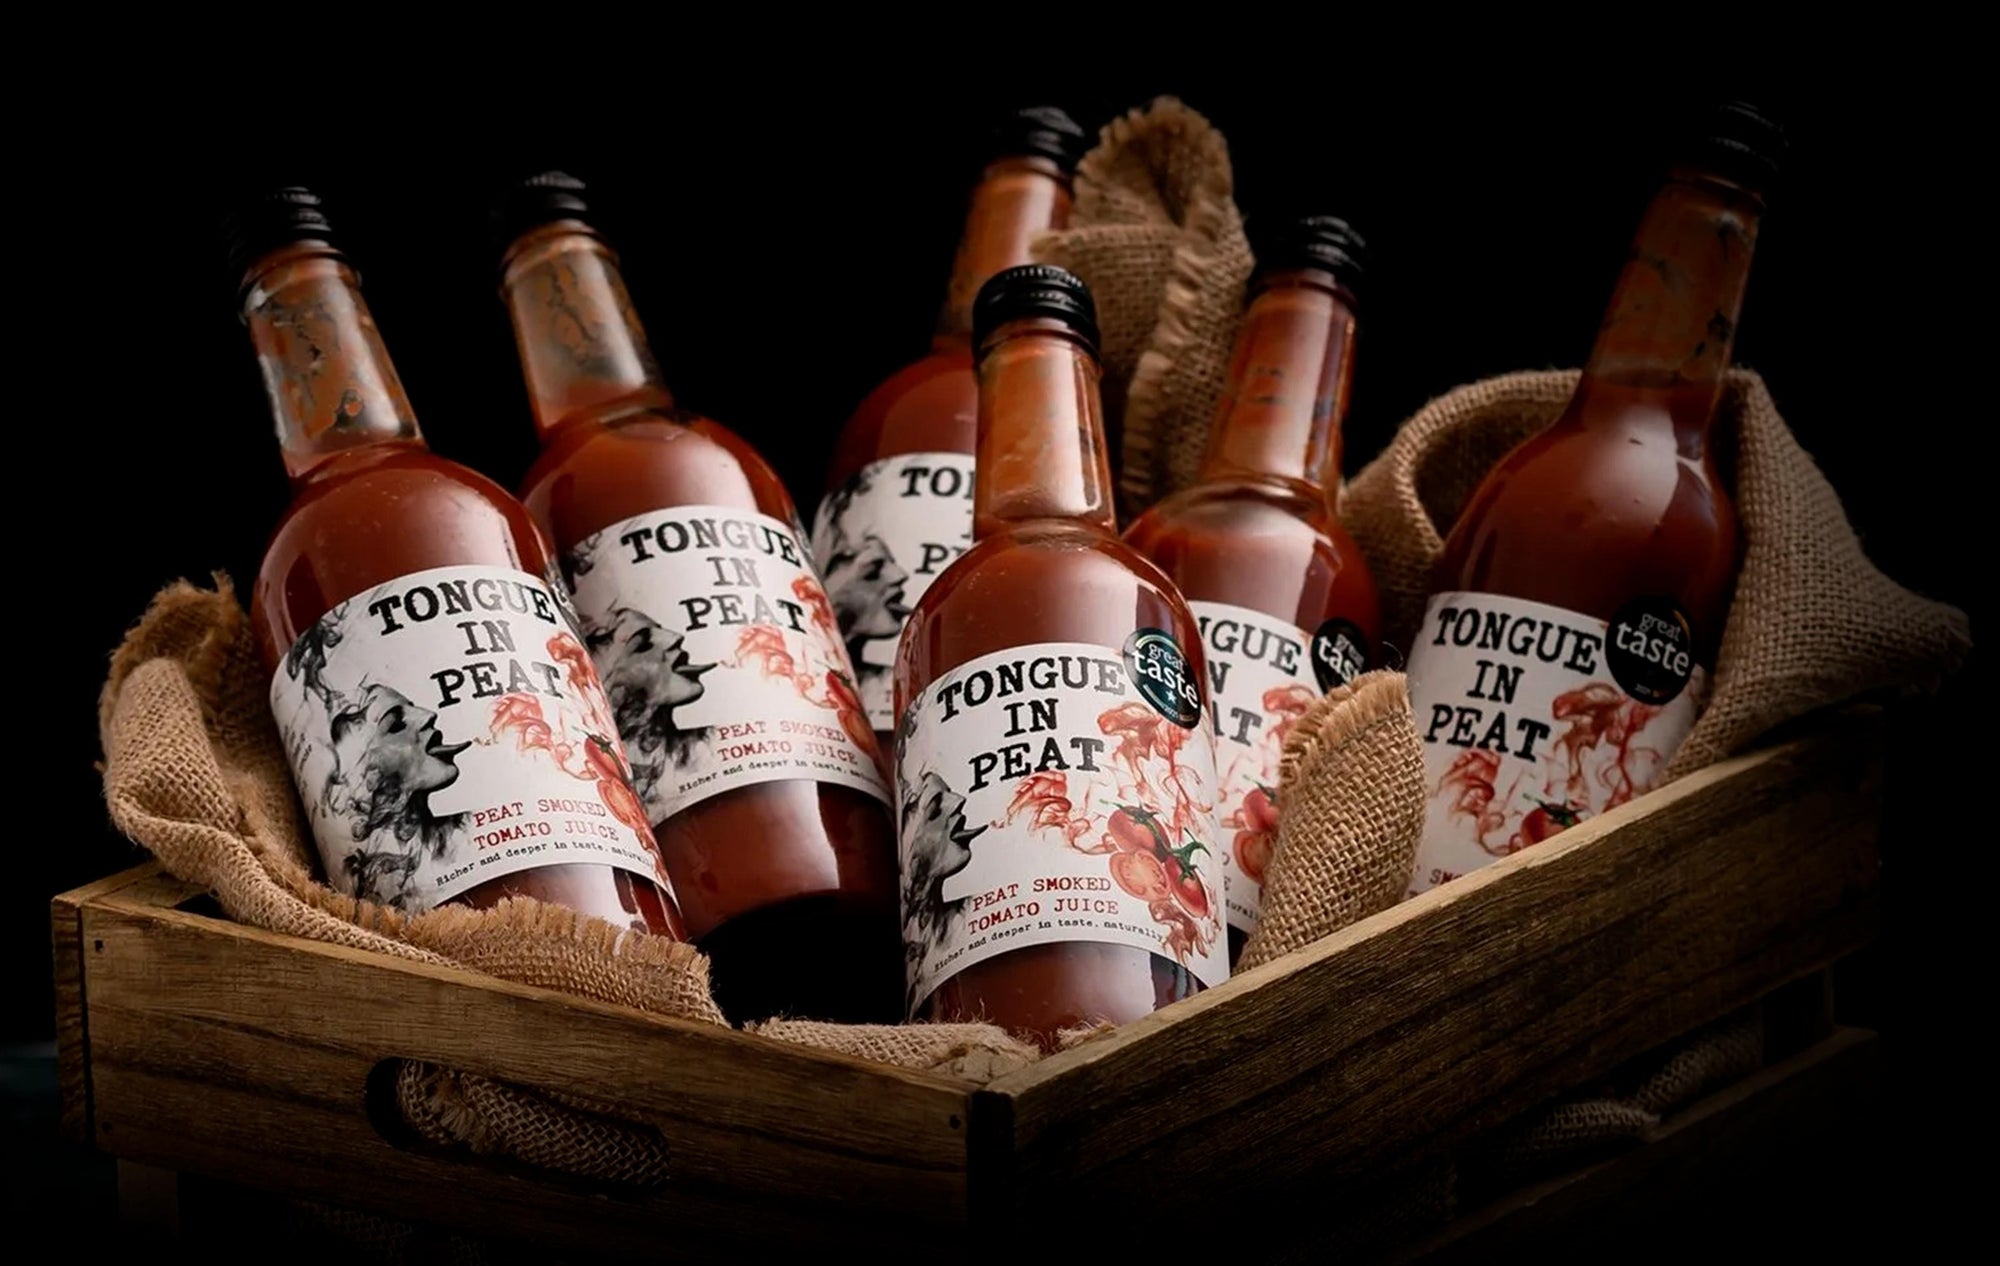 6 peat smoked tomato juice bottles by Tongue in Peat lying on top of a cloth inside a wooden basket